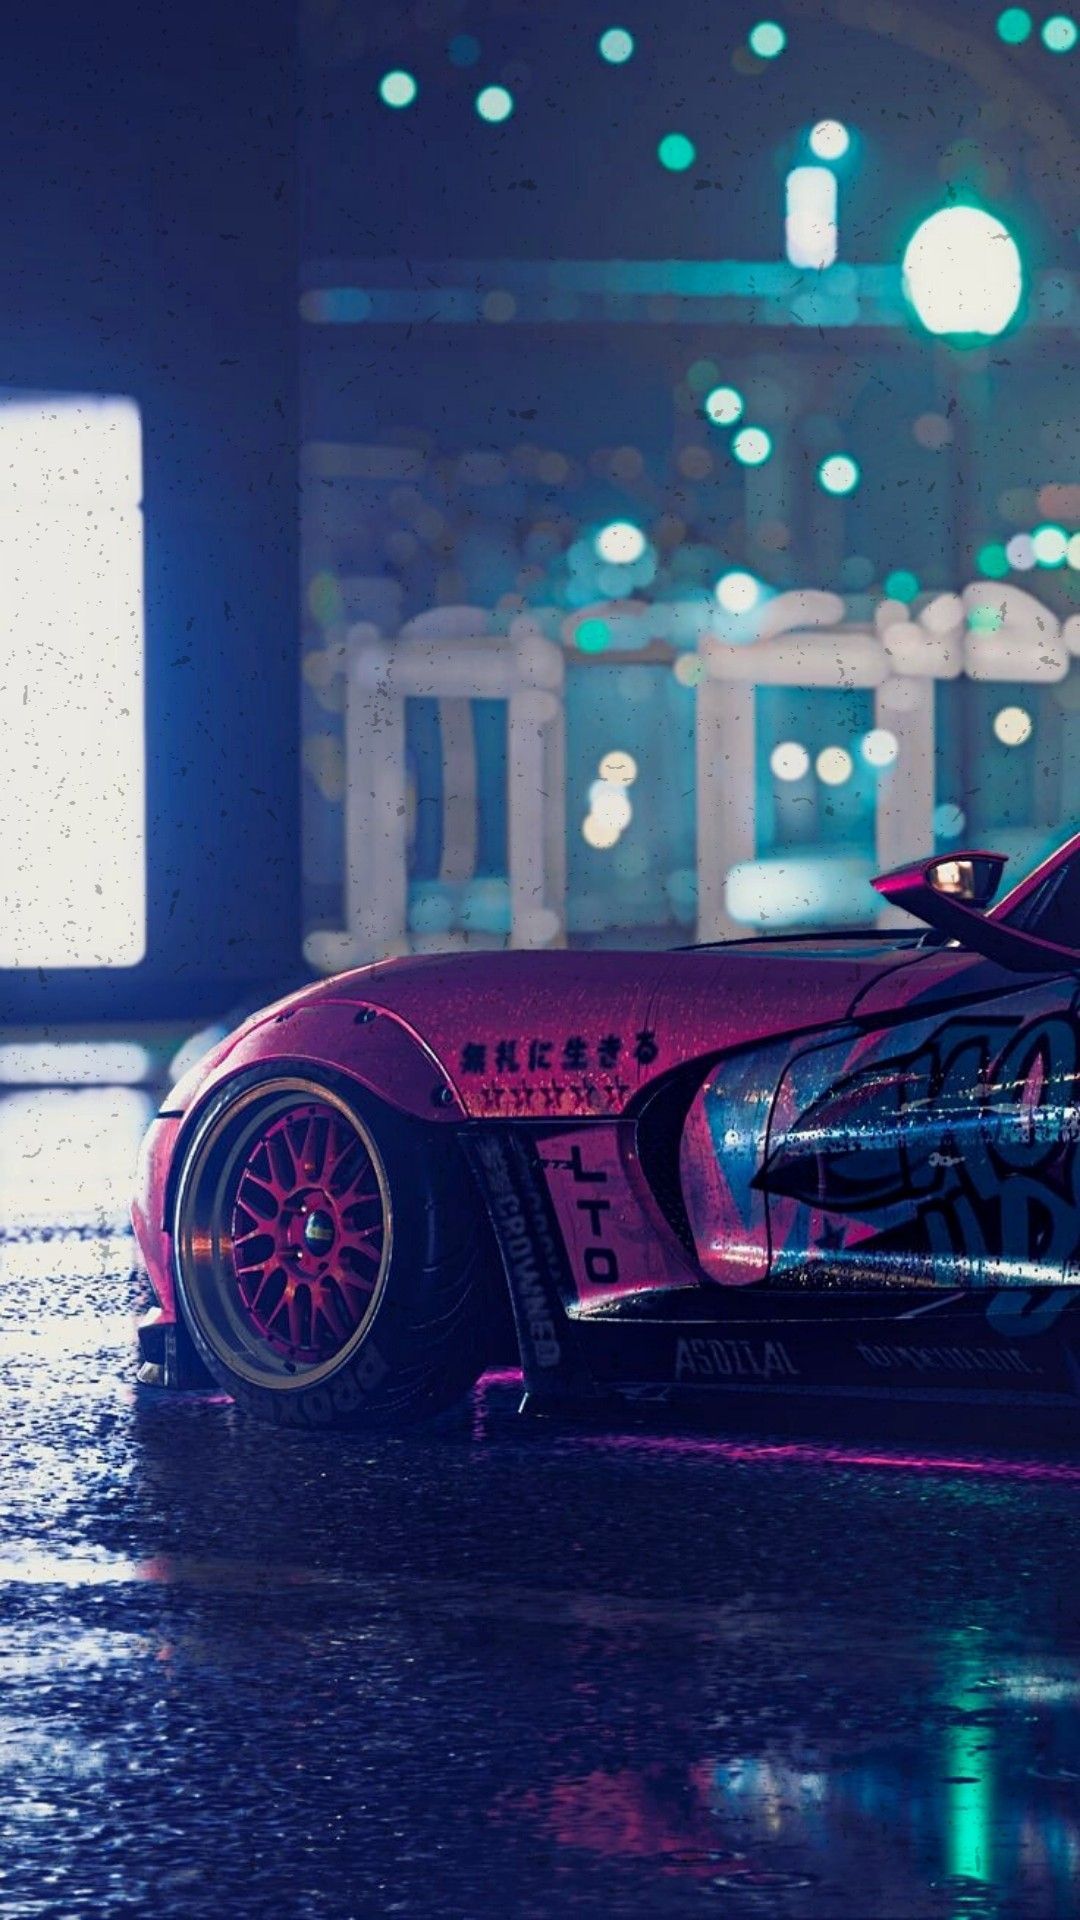 A pink car with neon lights on it - Cars